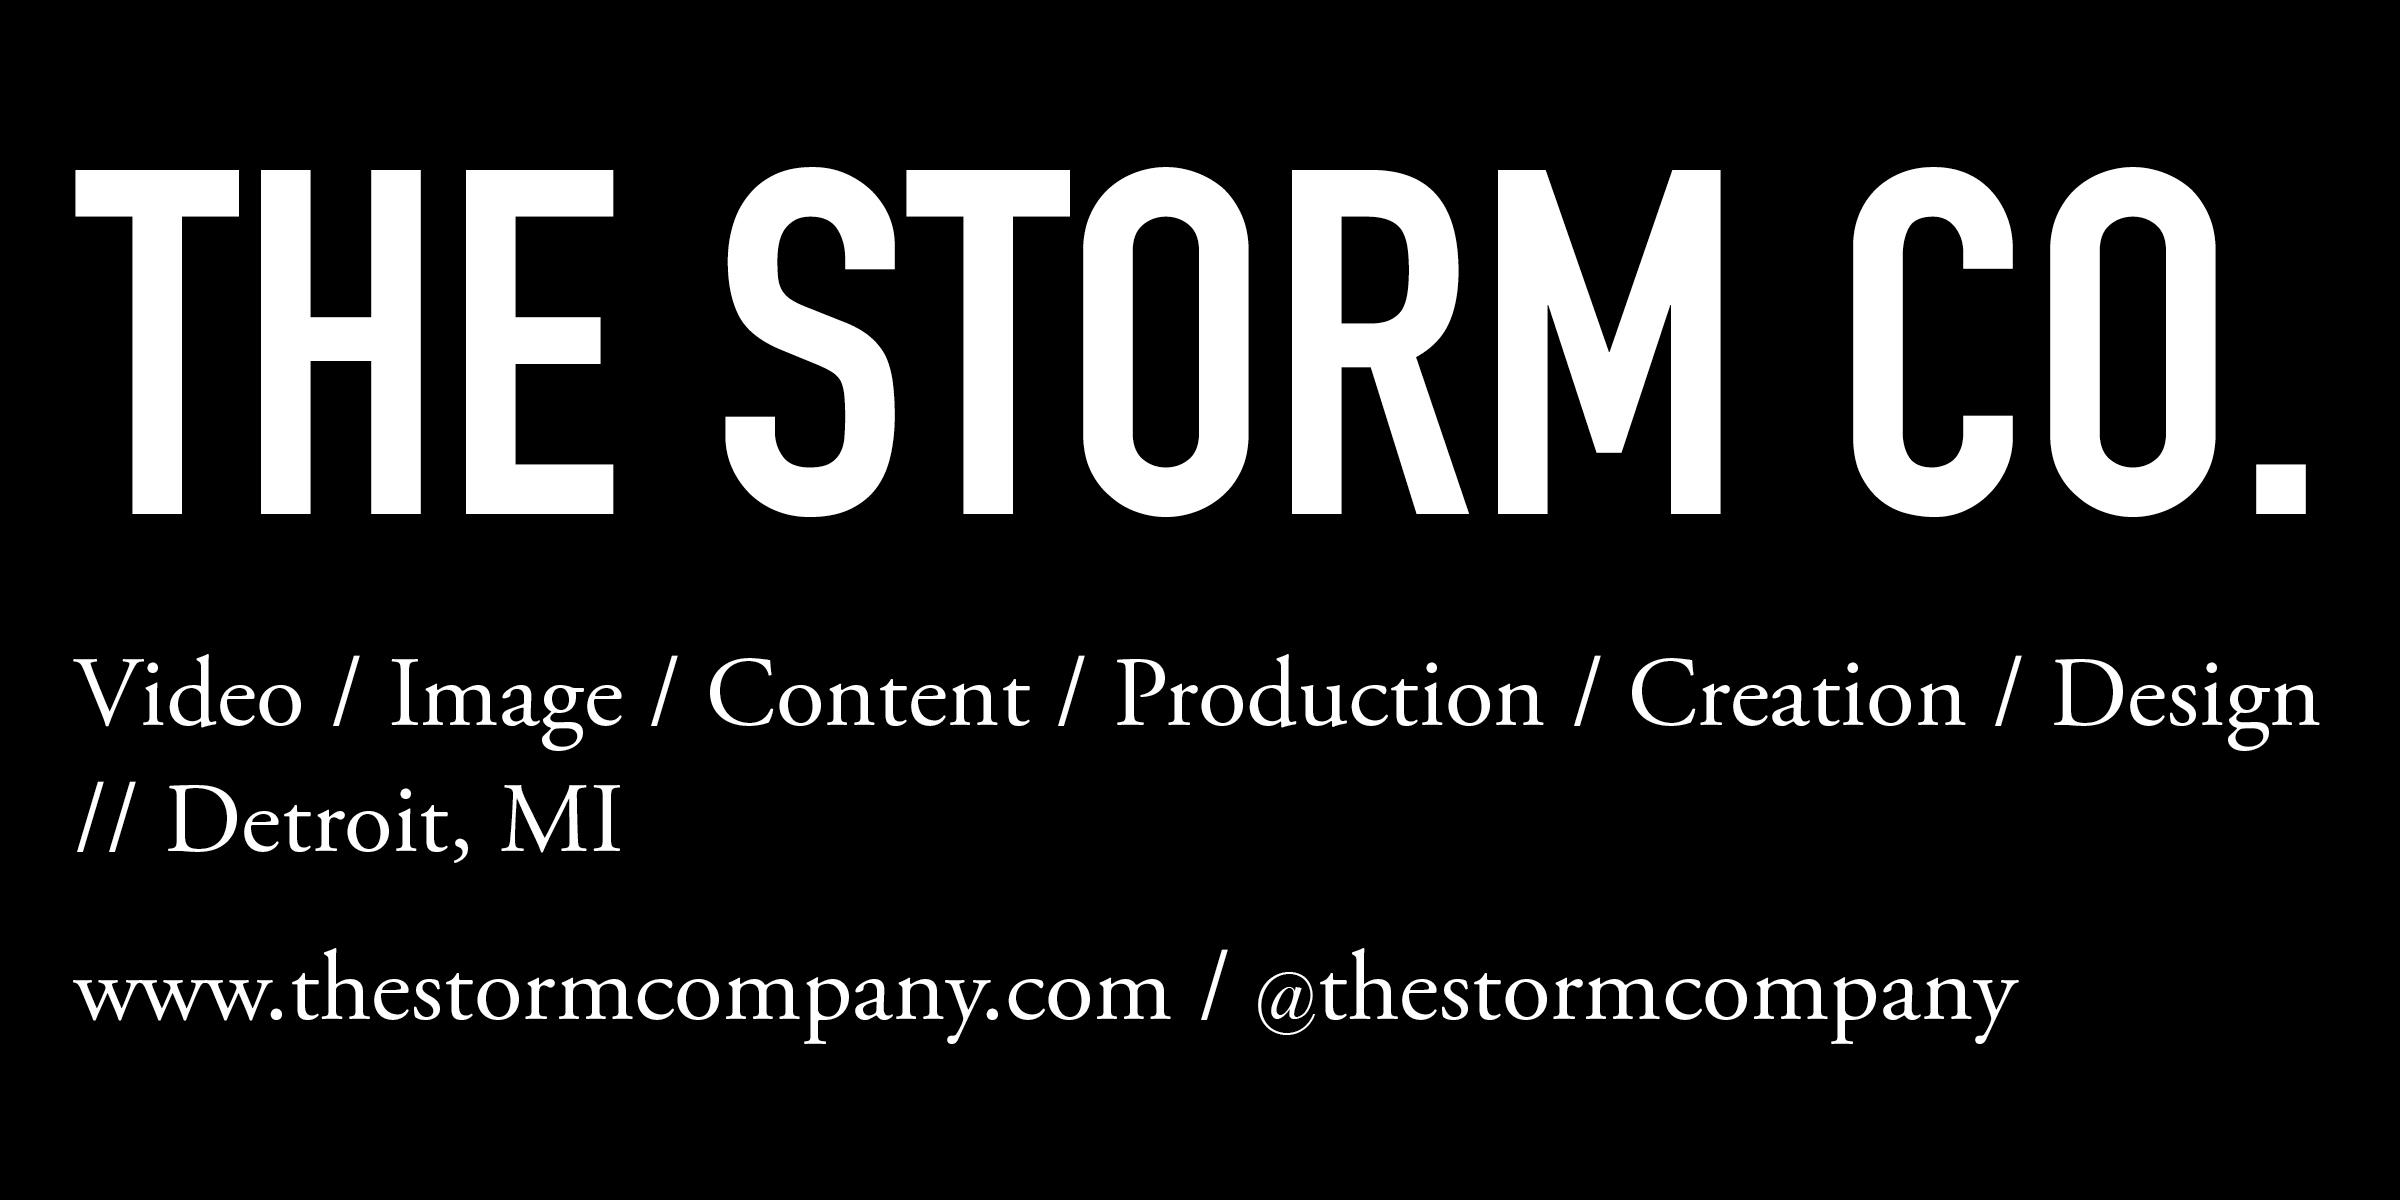 2018-The Storm Co-BHA Web Sponsor Page Graphic.jpg